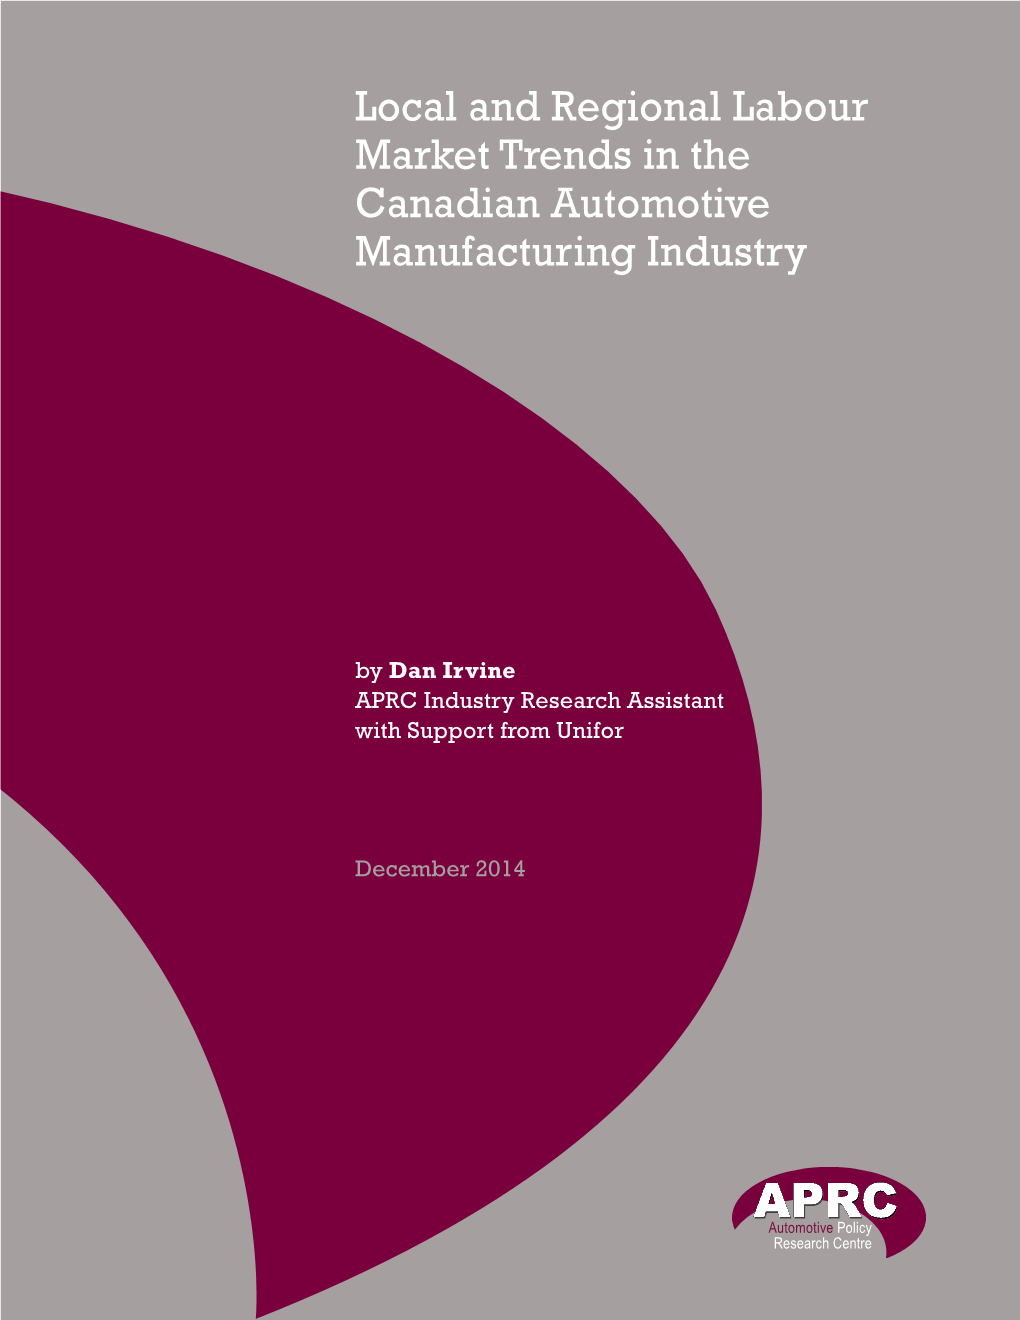 Local and Regional Labour Market Trends in the Canadian Automotive Manufacturing Industry